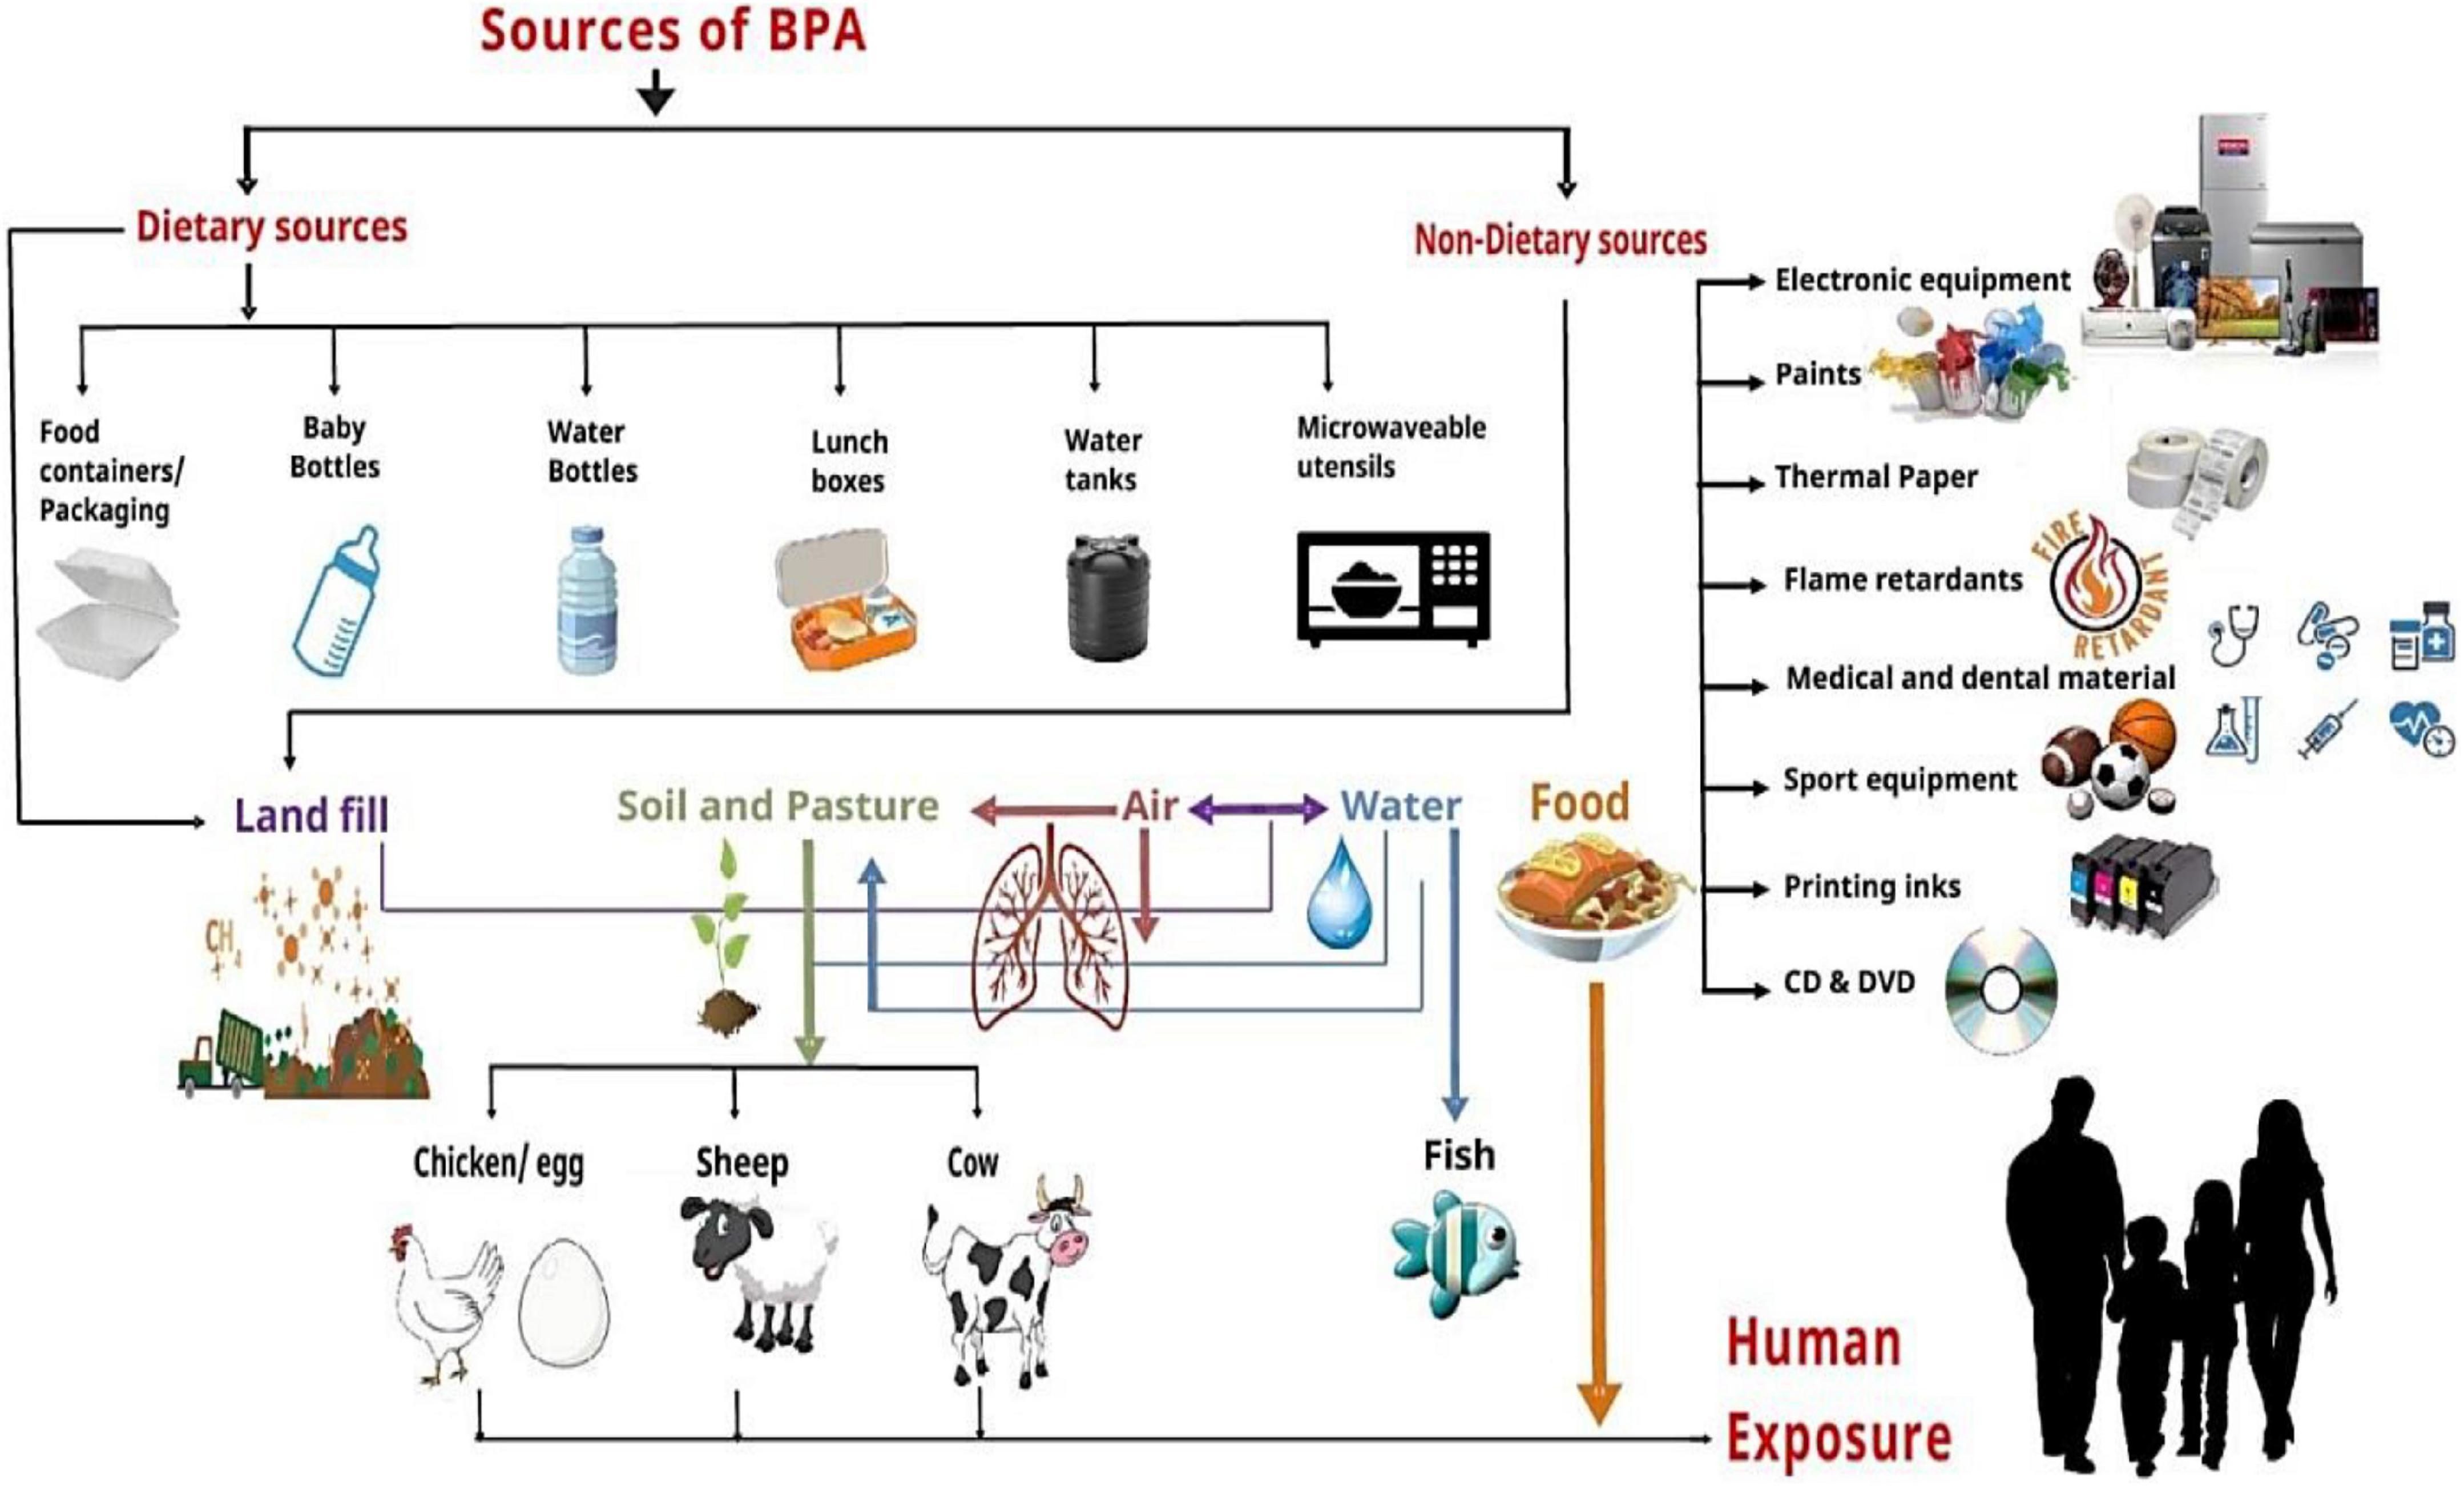 BPA (Bisphenol A) - Chemical Safety Facts